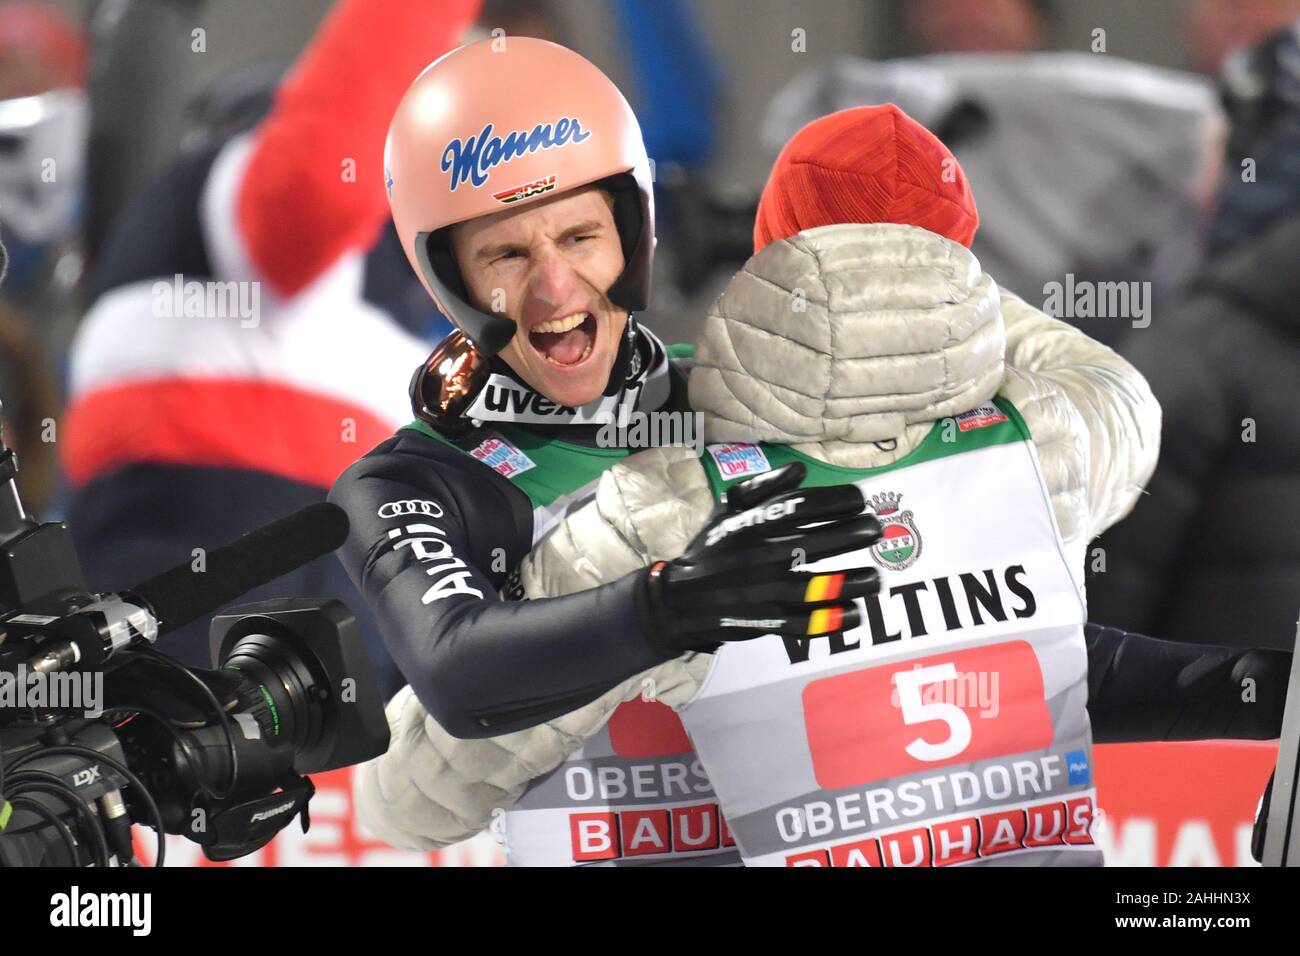 Karl GEIGER (GER), jubilation, joy, enthusiasm with Markus EISENBICHLER (GER, right), about 2nd place, ski jumping, 68th International Four Hills Tournament 2019/20. Opening competition in Oberstdorf, AUDI ARENA on December 29th, 2019. | usage worldwide Stock Photo